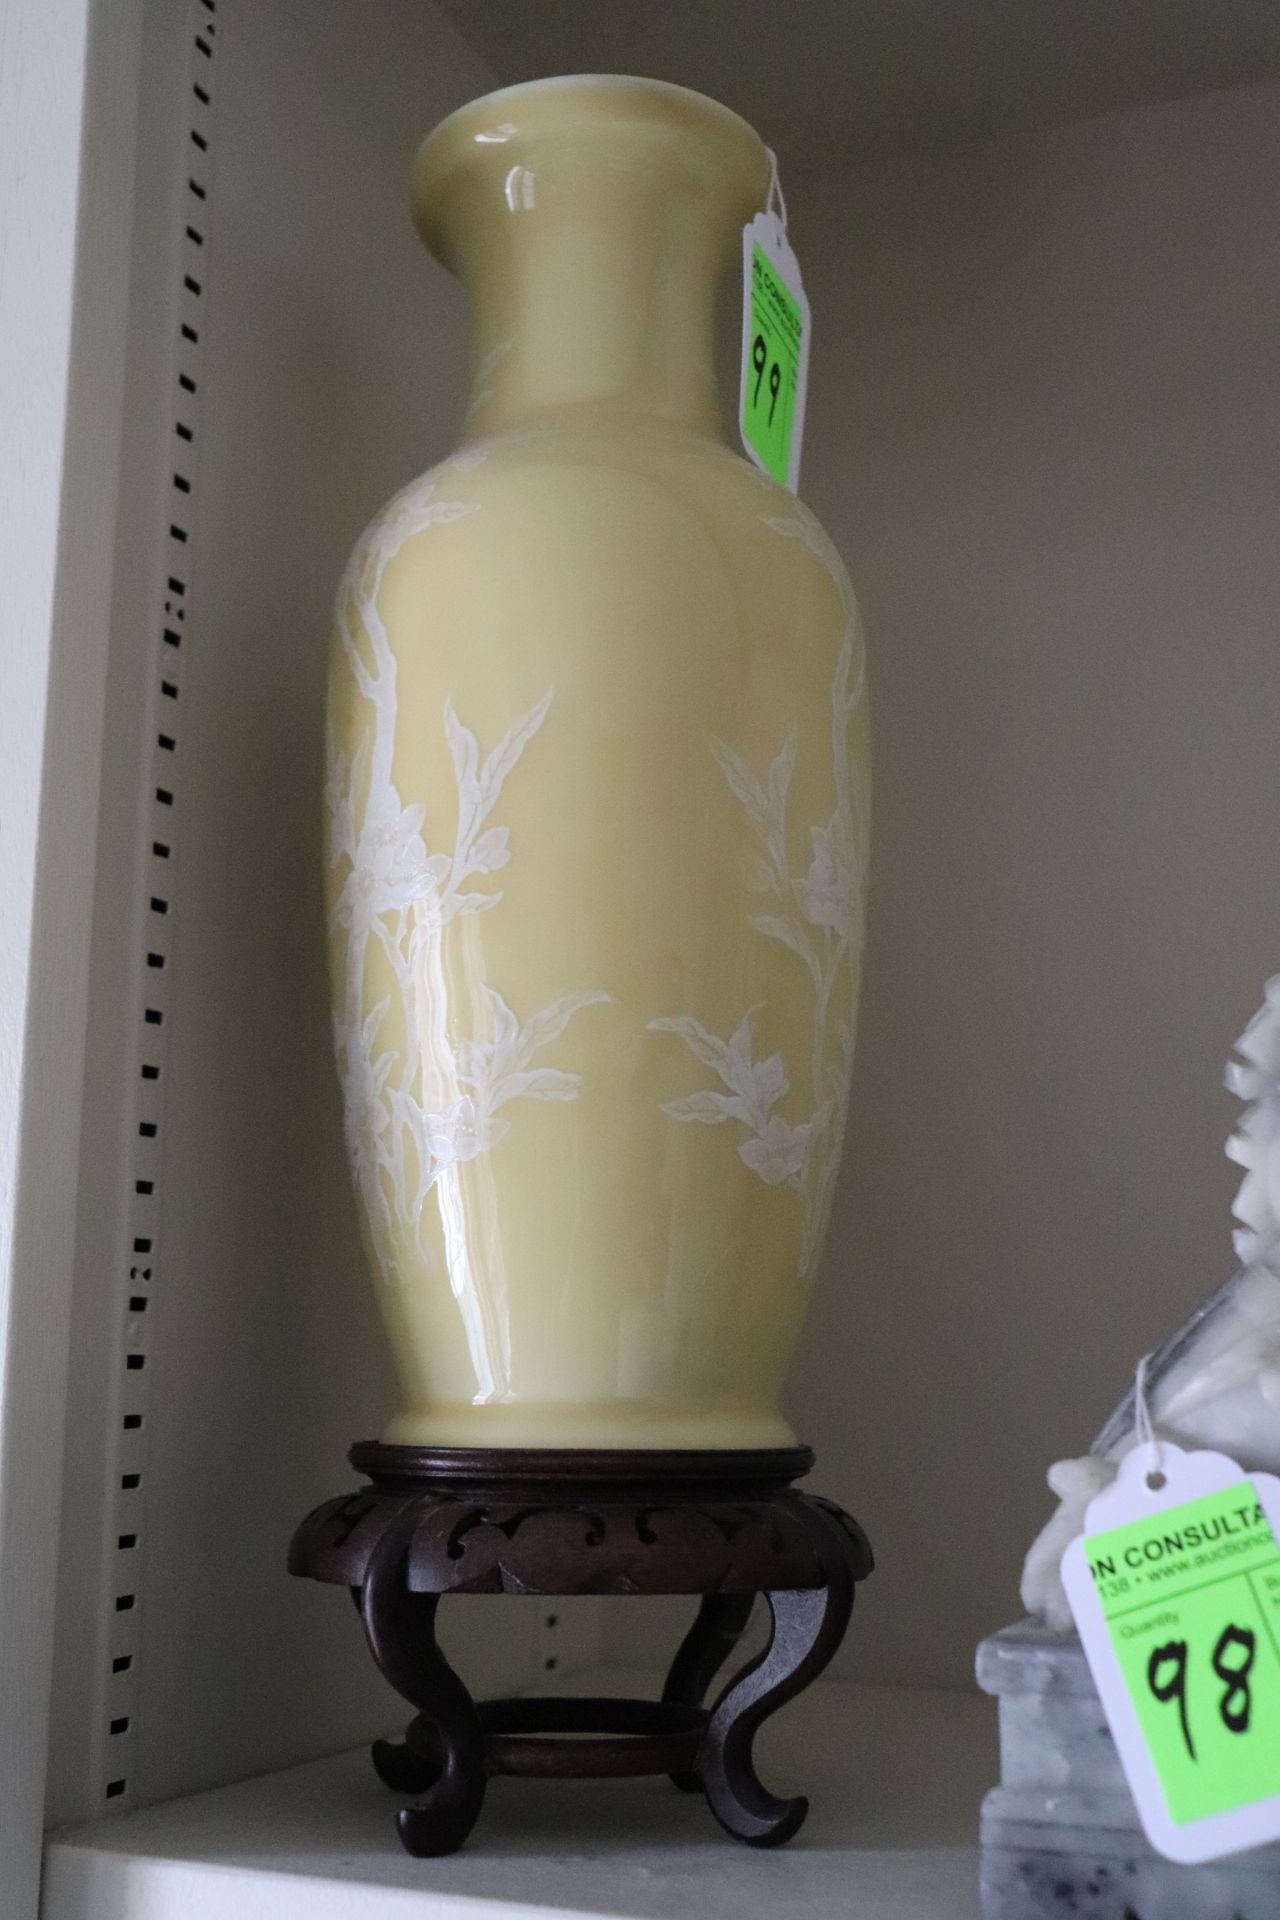 Chinese vase, height 12" on stand